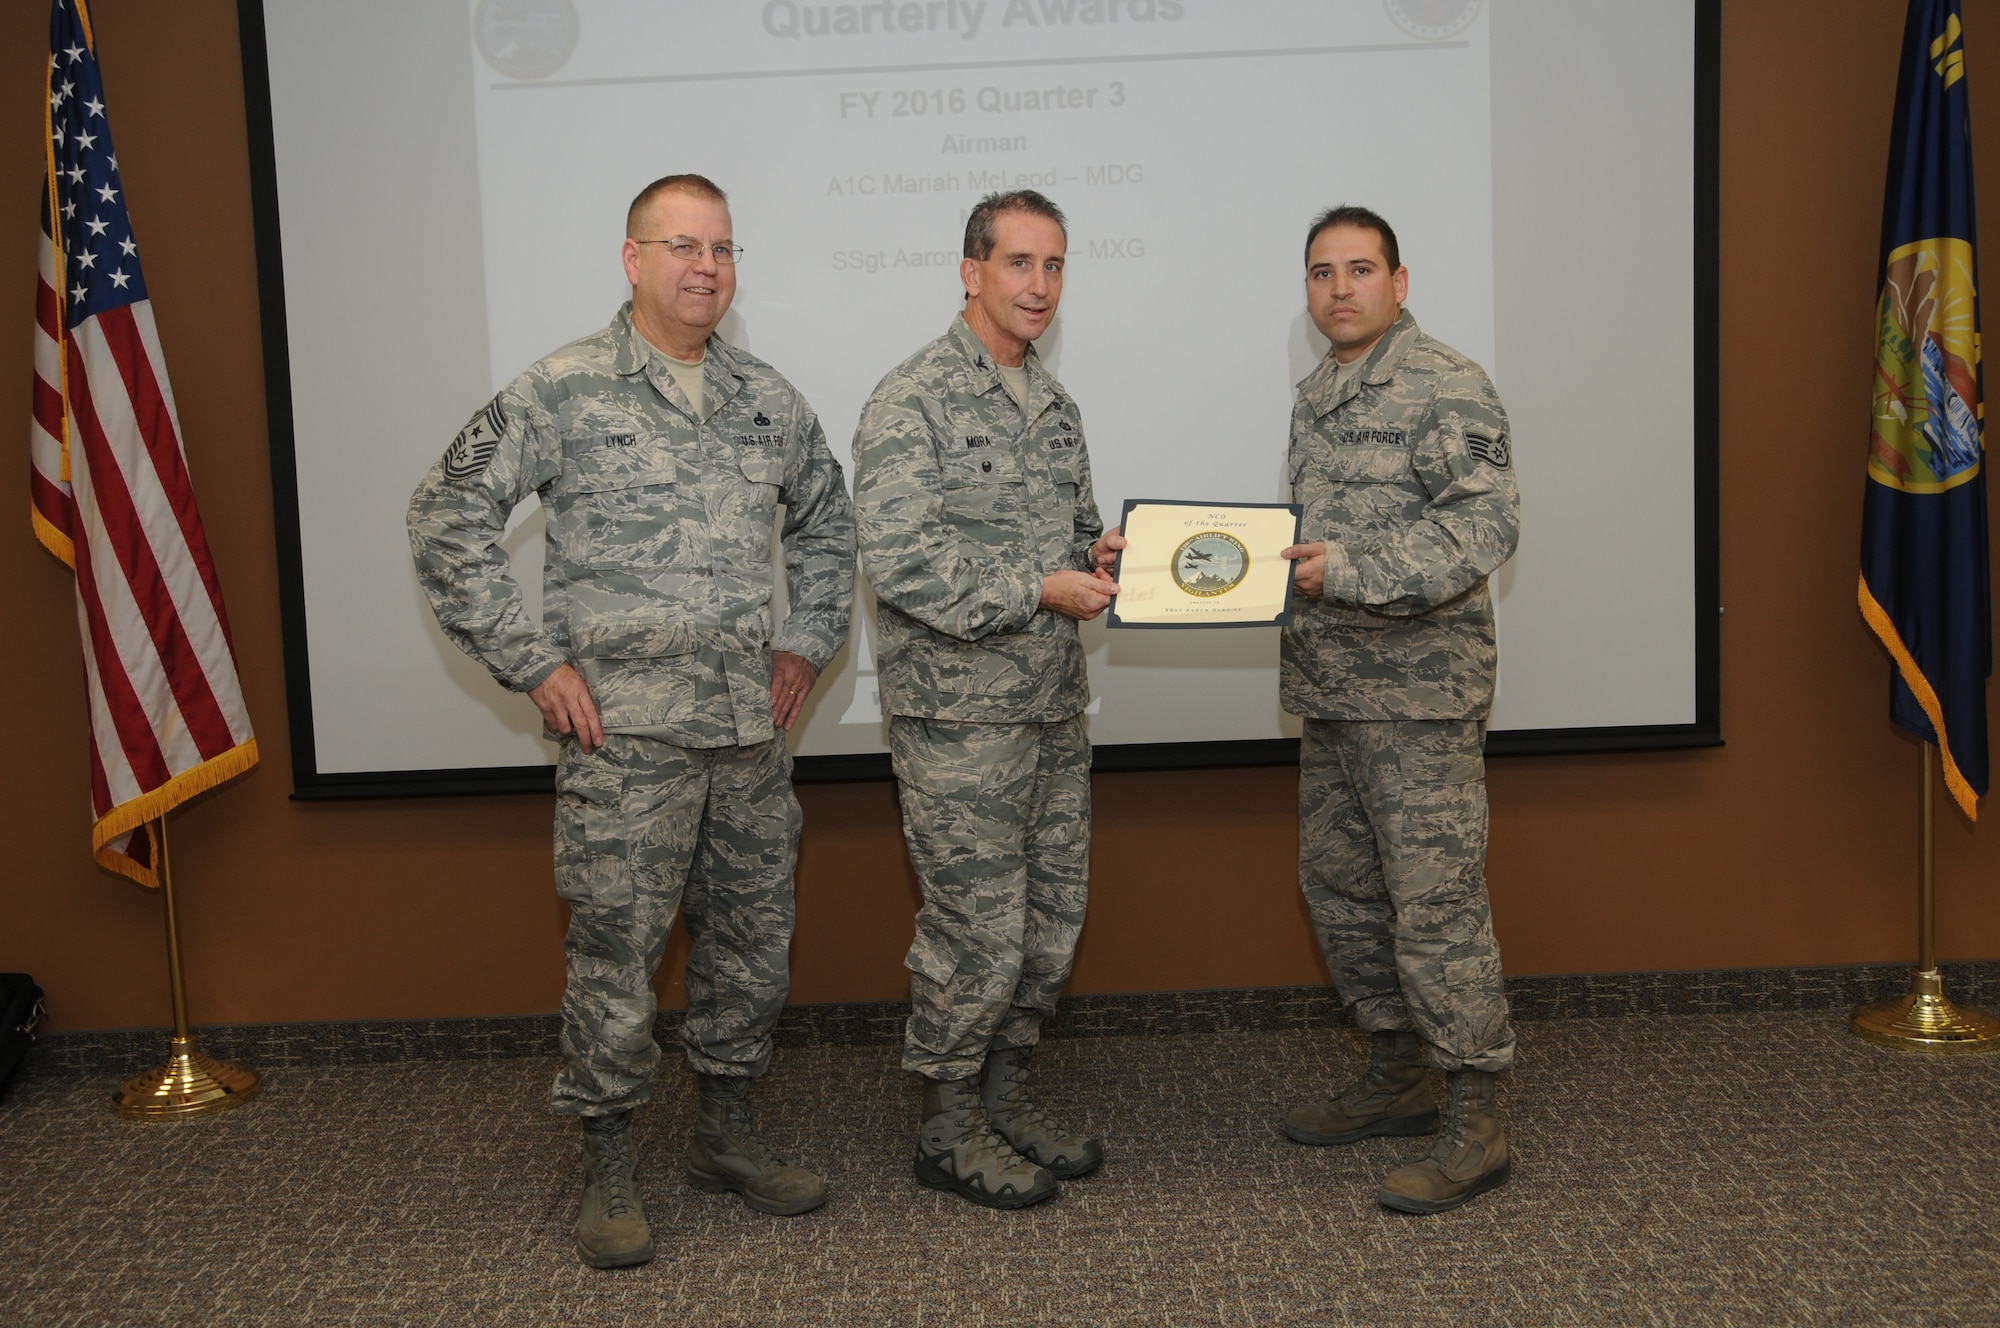 120th Airlift Wing Vice Commander Col. Thomas Mora and 120th AW Command Chief Master Sgt. Steven Lynch presented the Fiscal Year 2016 3rd quarter award winners for the 120th Airlift Wing of the Montana Air National Guard during the Stand-up Briefing held in the Larsen Room of the wing headquarters building Nov. 4, 2016. Aircraft Structural Maintenance Craftsman Staff Sgt. Aaron Duboise from the 120th Maintenance Group received the award in the noncommissioned officer category.